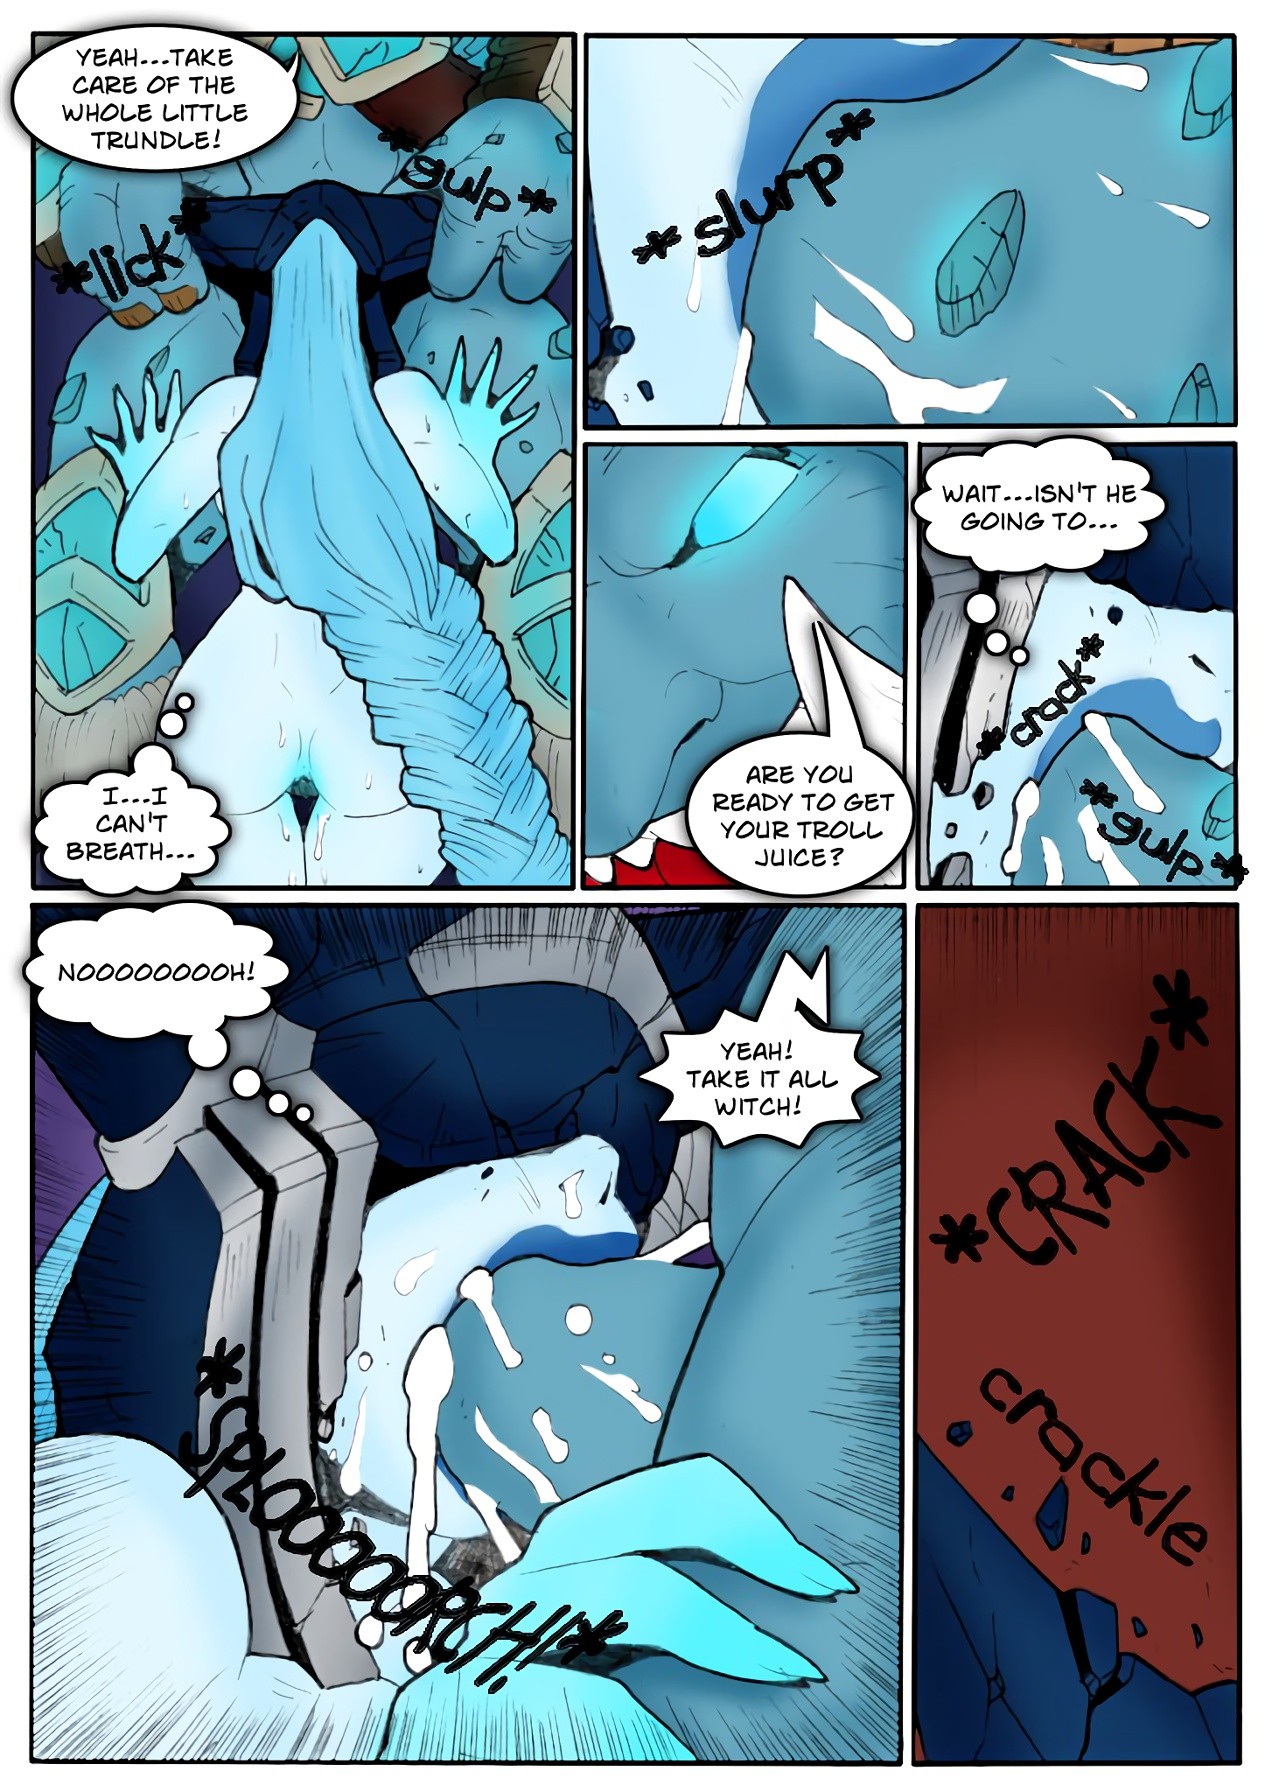 Tales of the Troll King ch. 1 - 3 ] [Colorized] porn comic picture 10